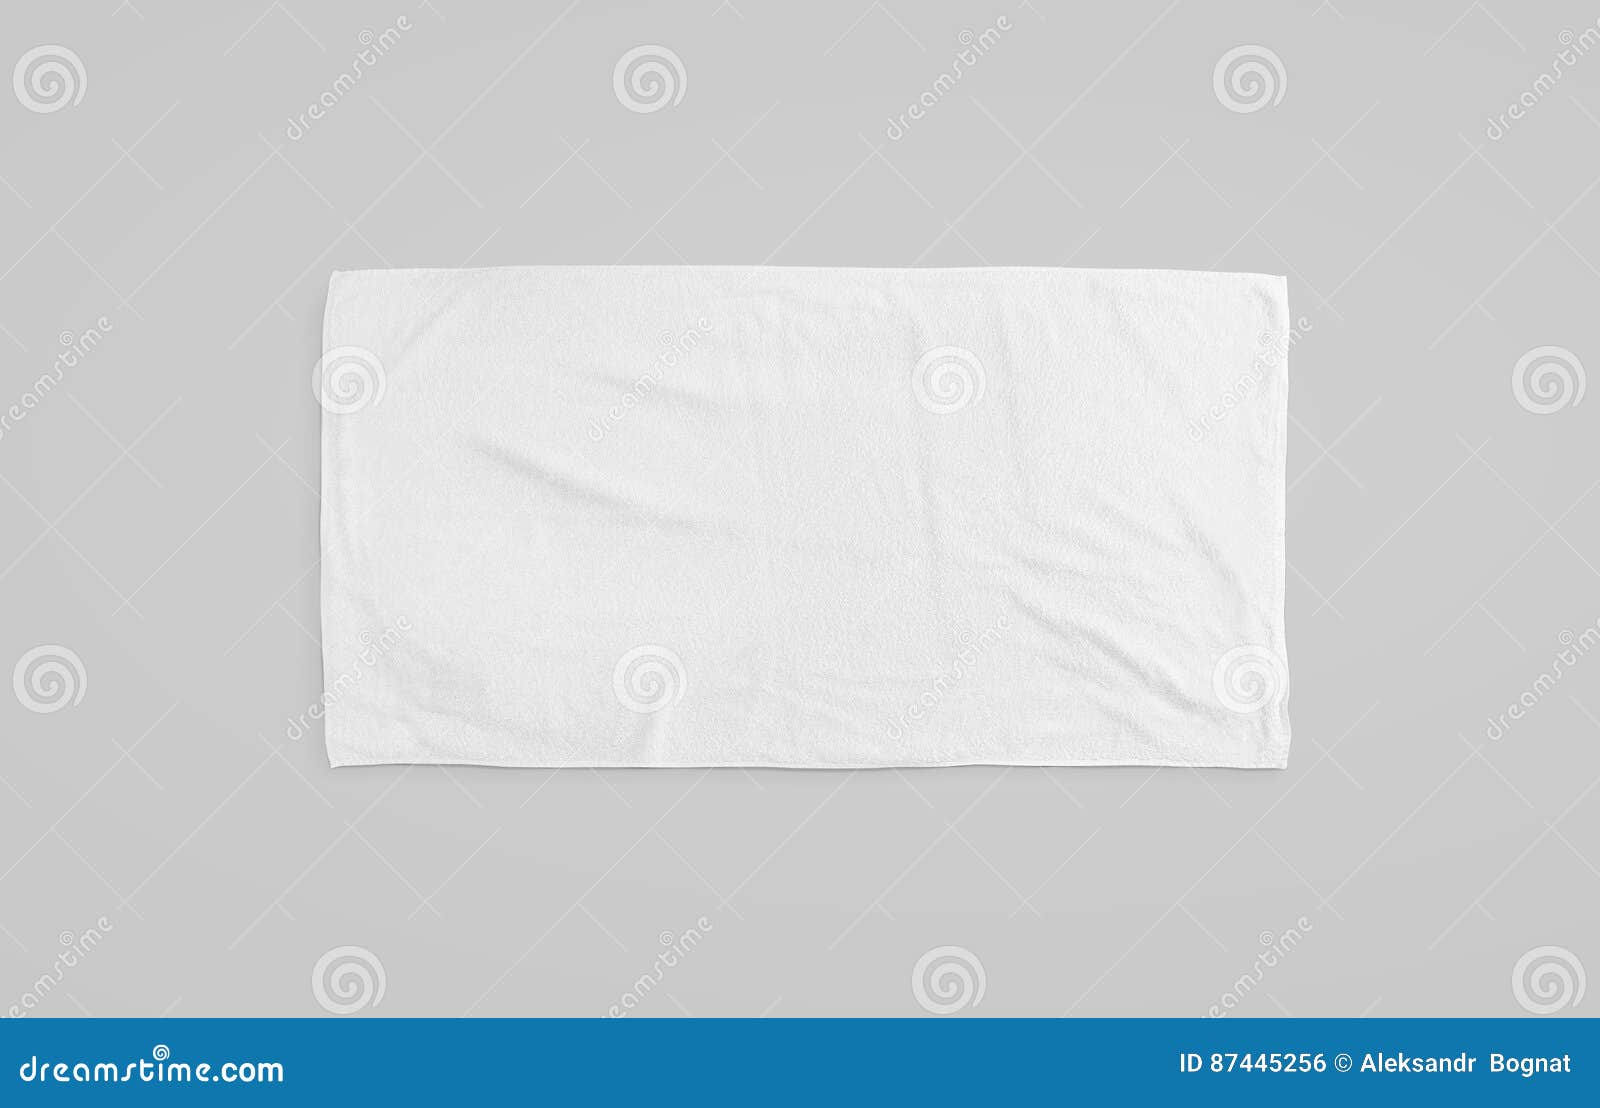 Black White Soft Beach Towel Mockup Clear Unfolded Wiper Stock Photo Image Of Clear Showing 87445256